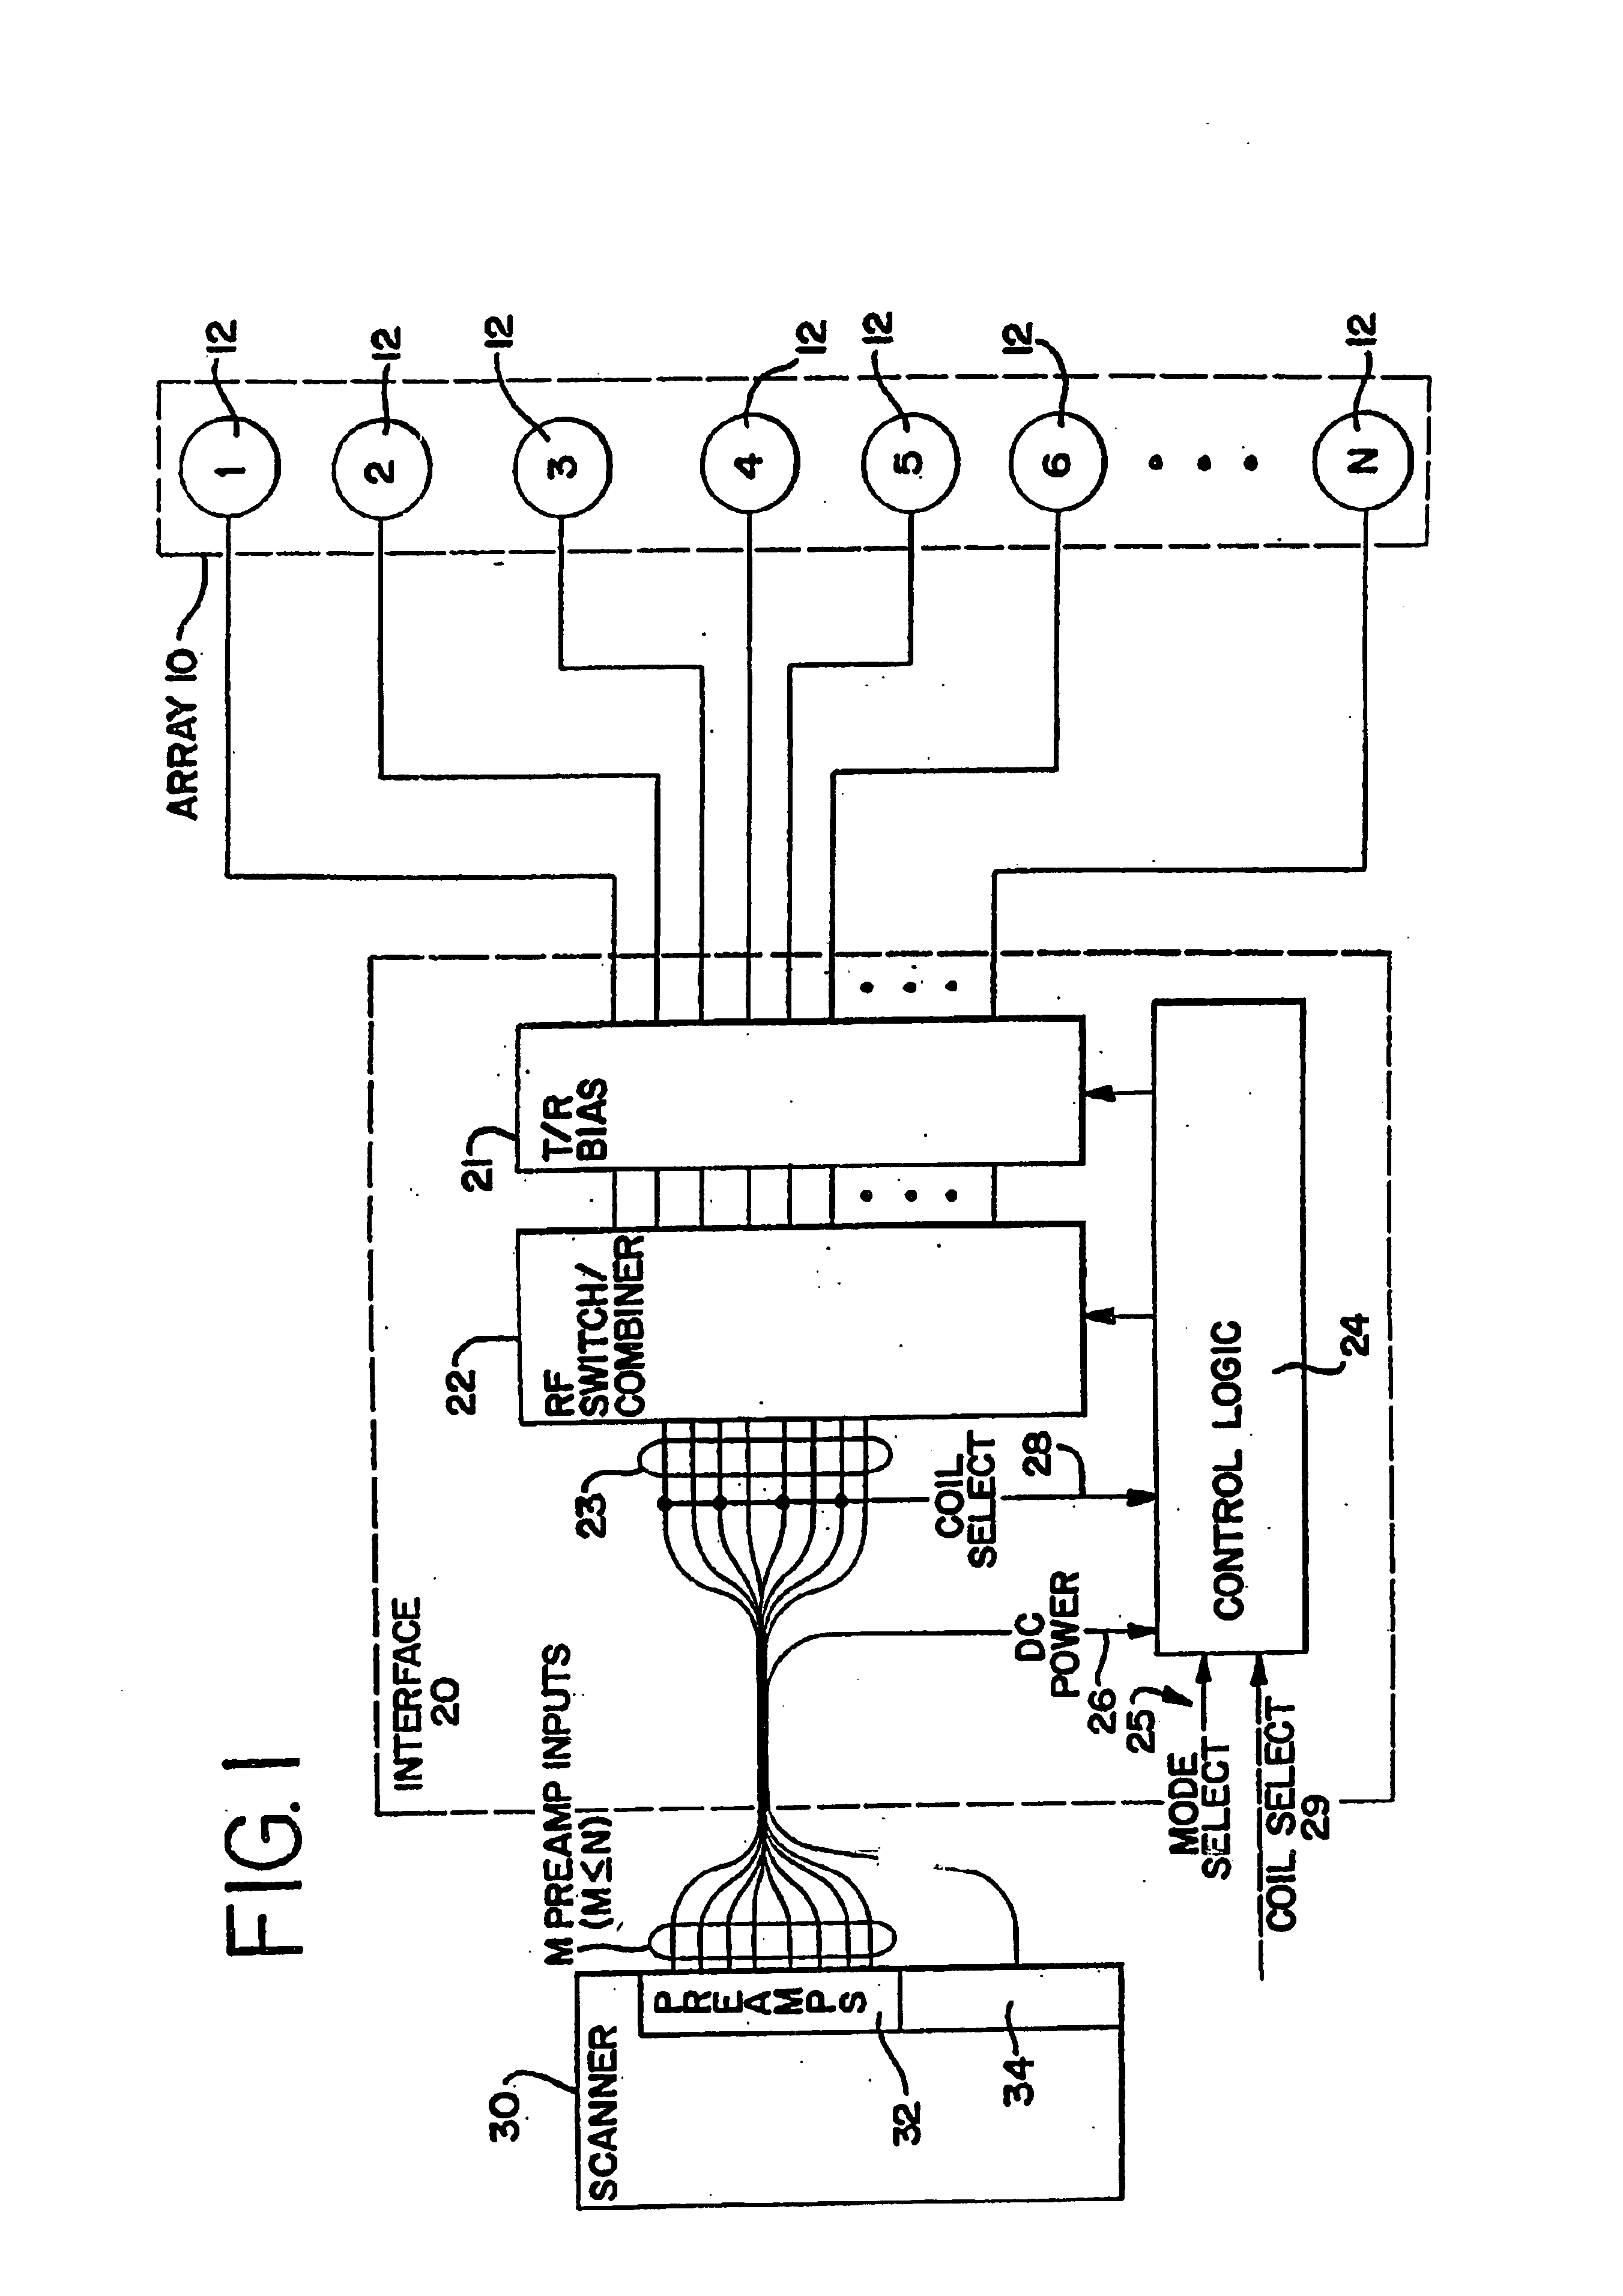 Interface for coupling an array of coils to a magnetic resonance imaging system